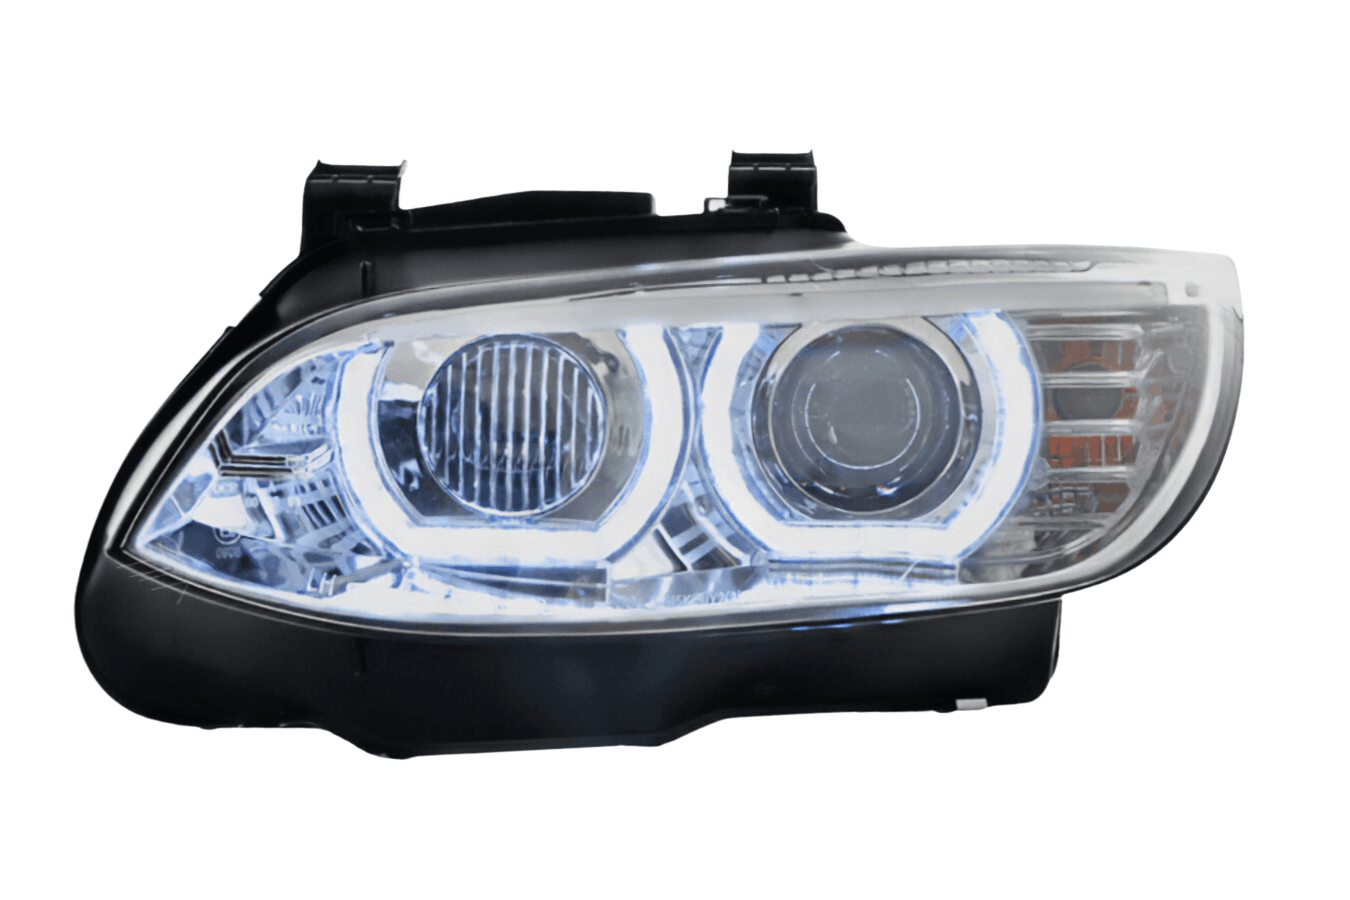 BMW 3-series E92 / E93 - Chrome LED Headlights Upgrade (2006-2010) - For NON AFS Models - K2 Industries